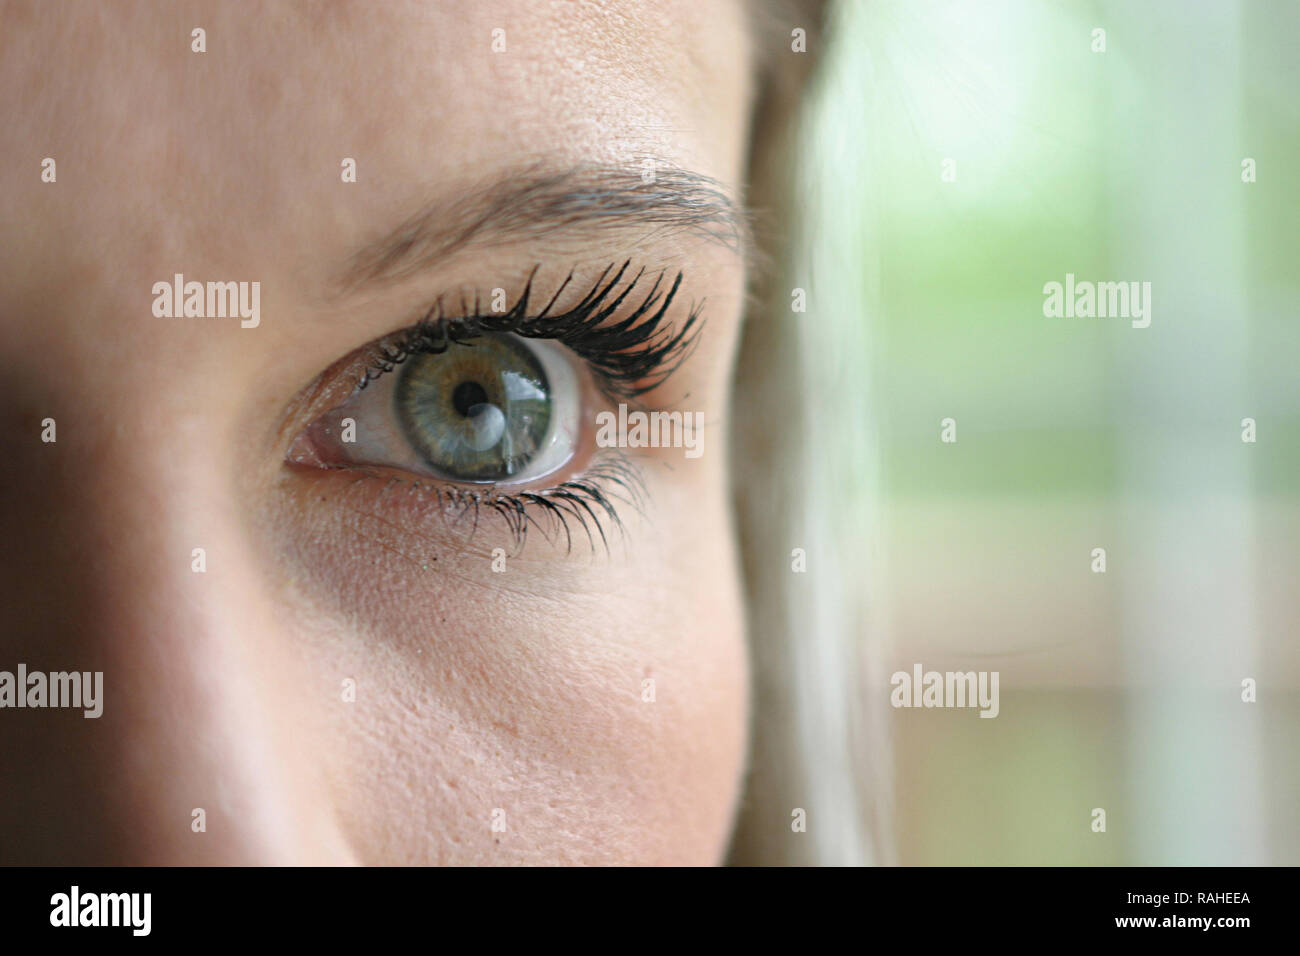 Young brunette woman's eye and half of her face. Stock Photo